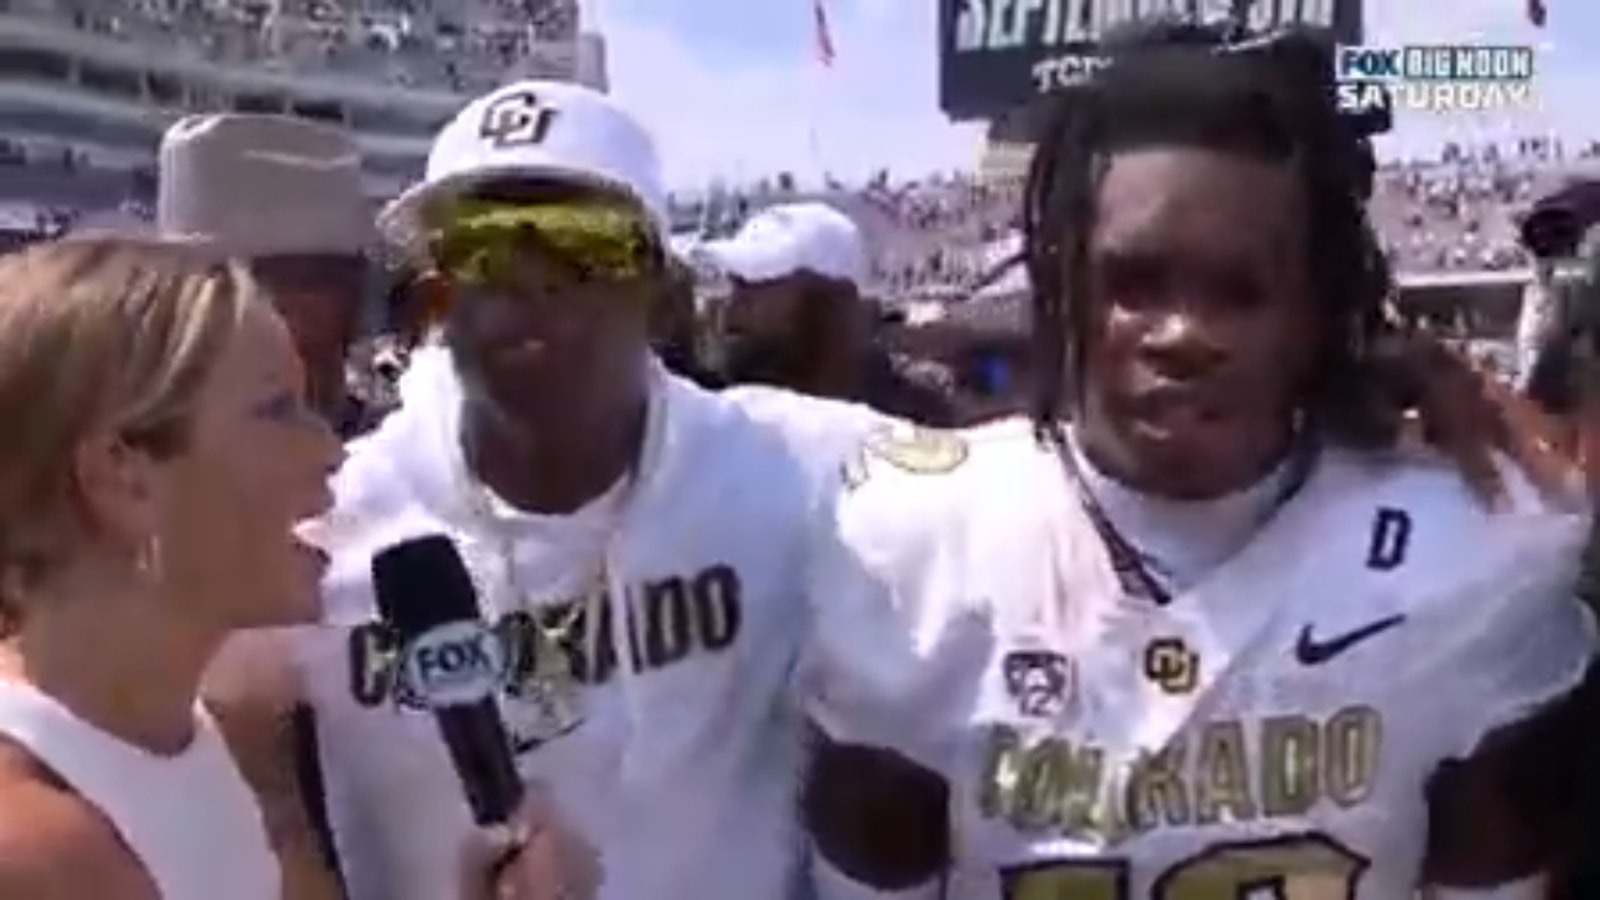 'God this is good' - Colorado's Deion Sanders speaks after stunning TCU on the road